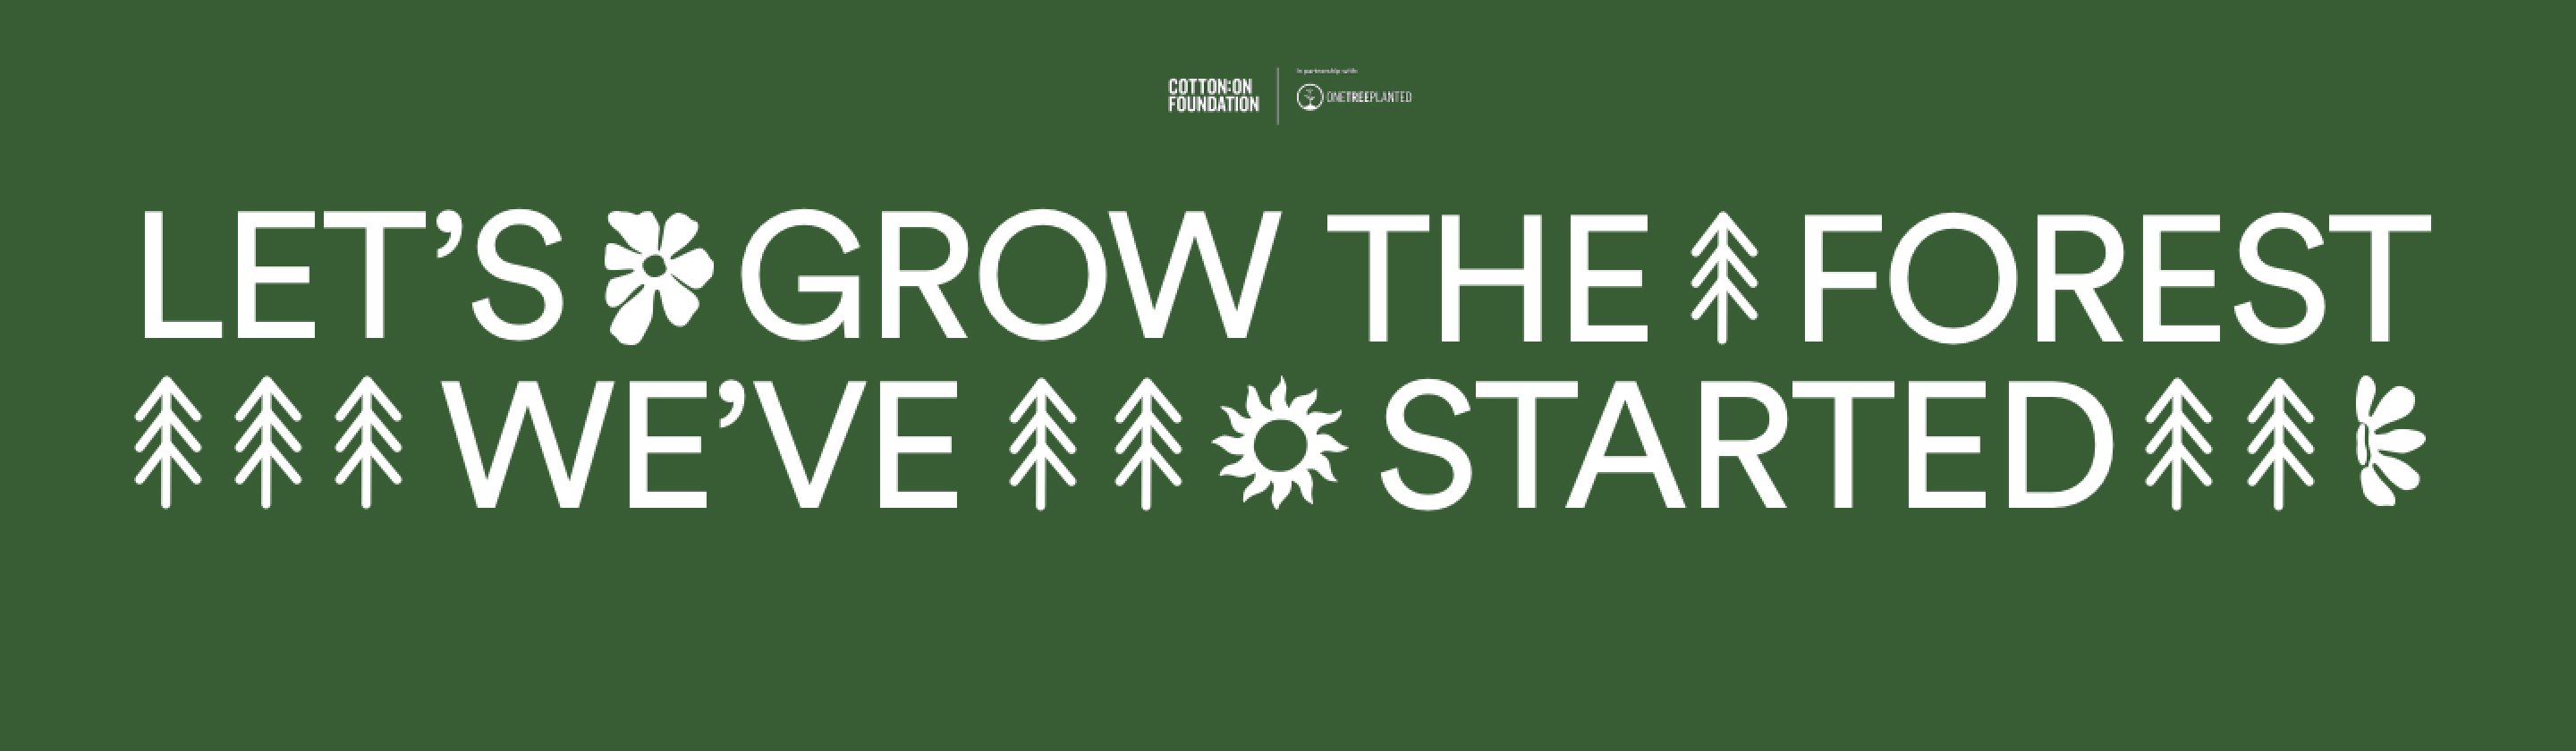 Let's grow the forest. We've started.